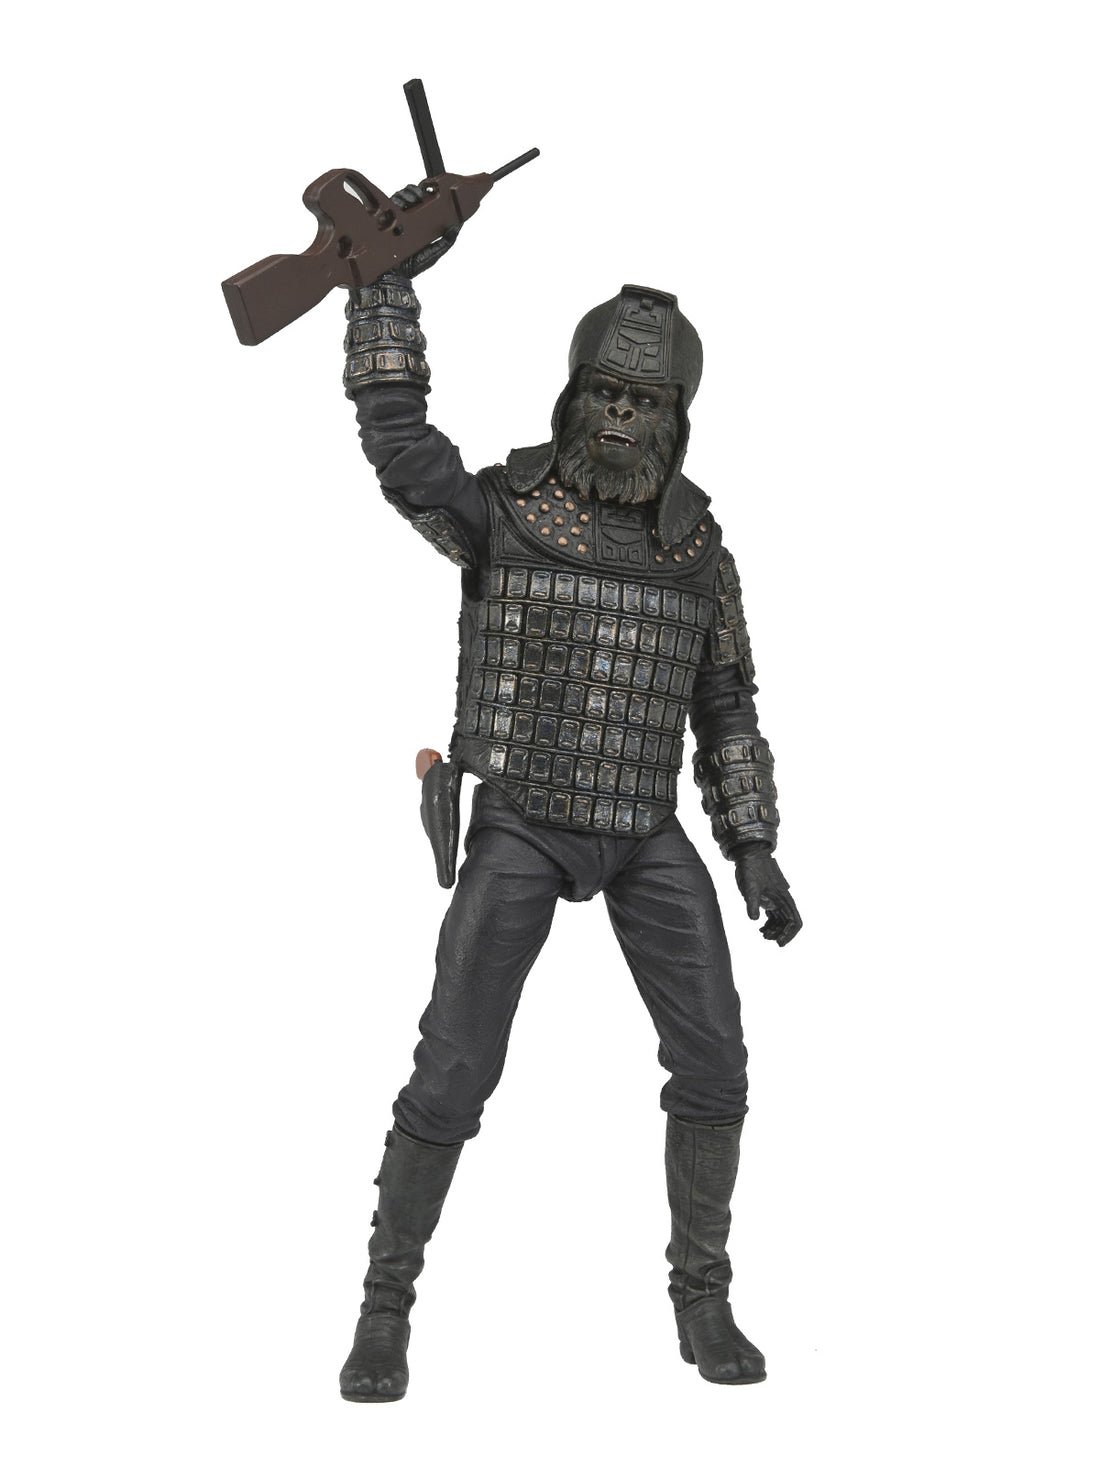 BUY NOW - PLANET OF THE APES - GENERAL URSUS LEGACY SERIES - 7&quot; SCALE ACTION FIGURE | NECA ONLINE AU